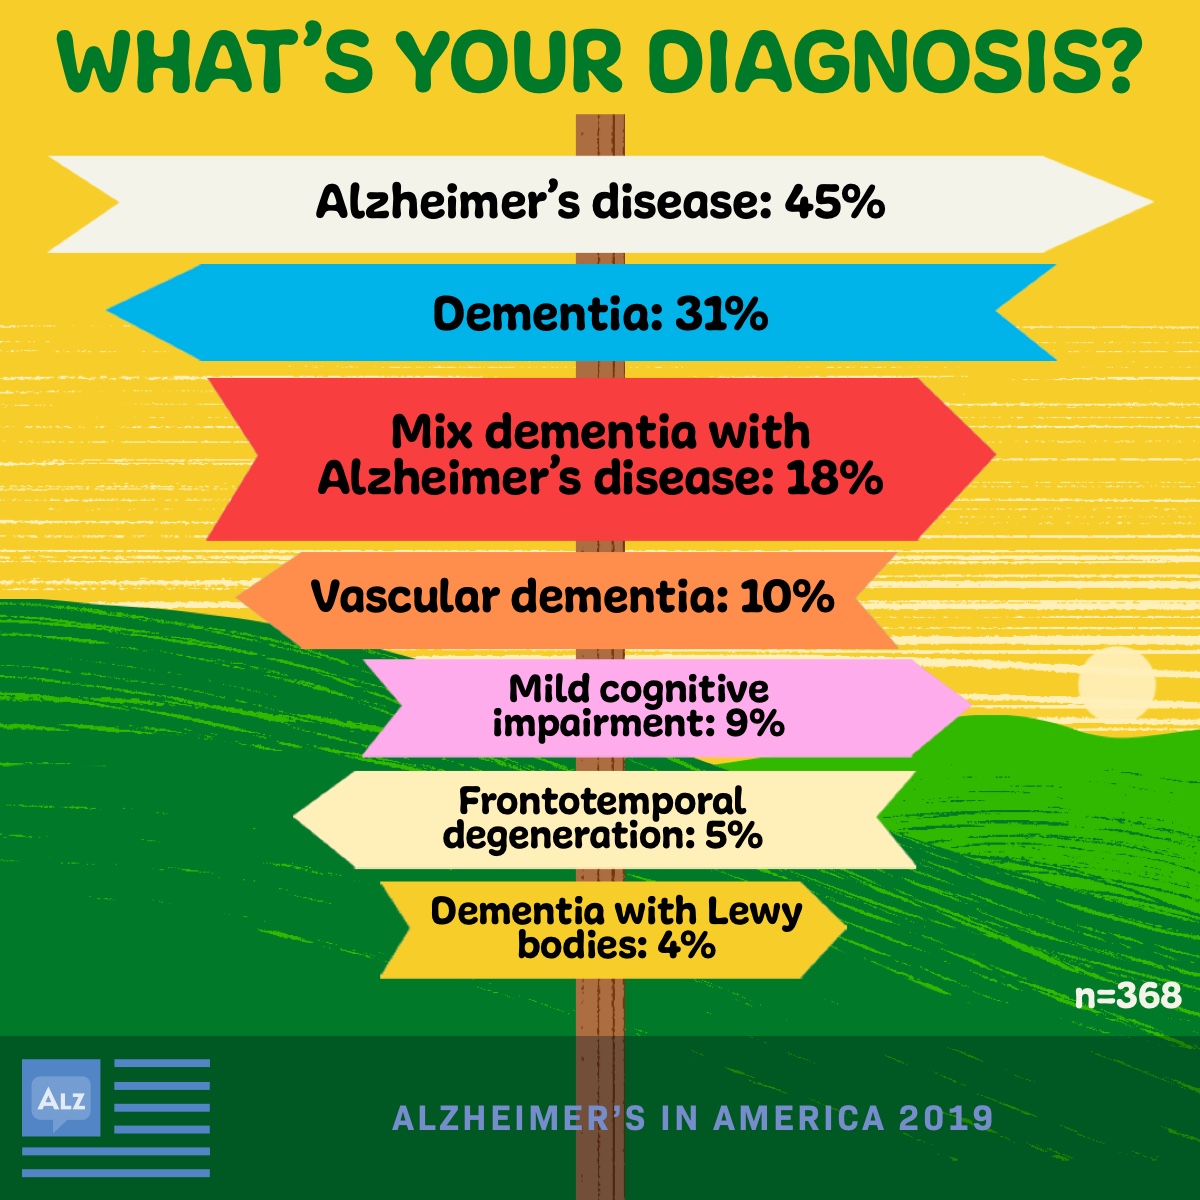 A poll with arrows showing prevalence of types of dementia diagnoses, showing Alzheimer’s disease at 45%, dementia at 31% and vascular dementia at 10%